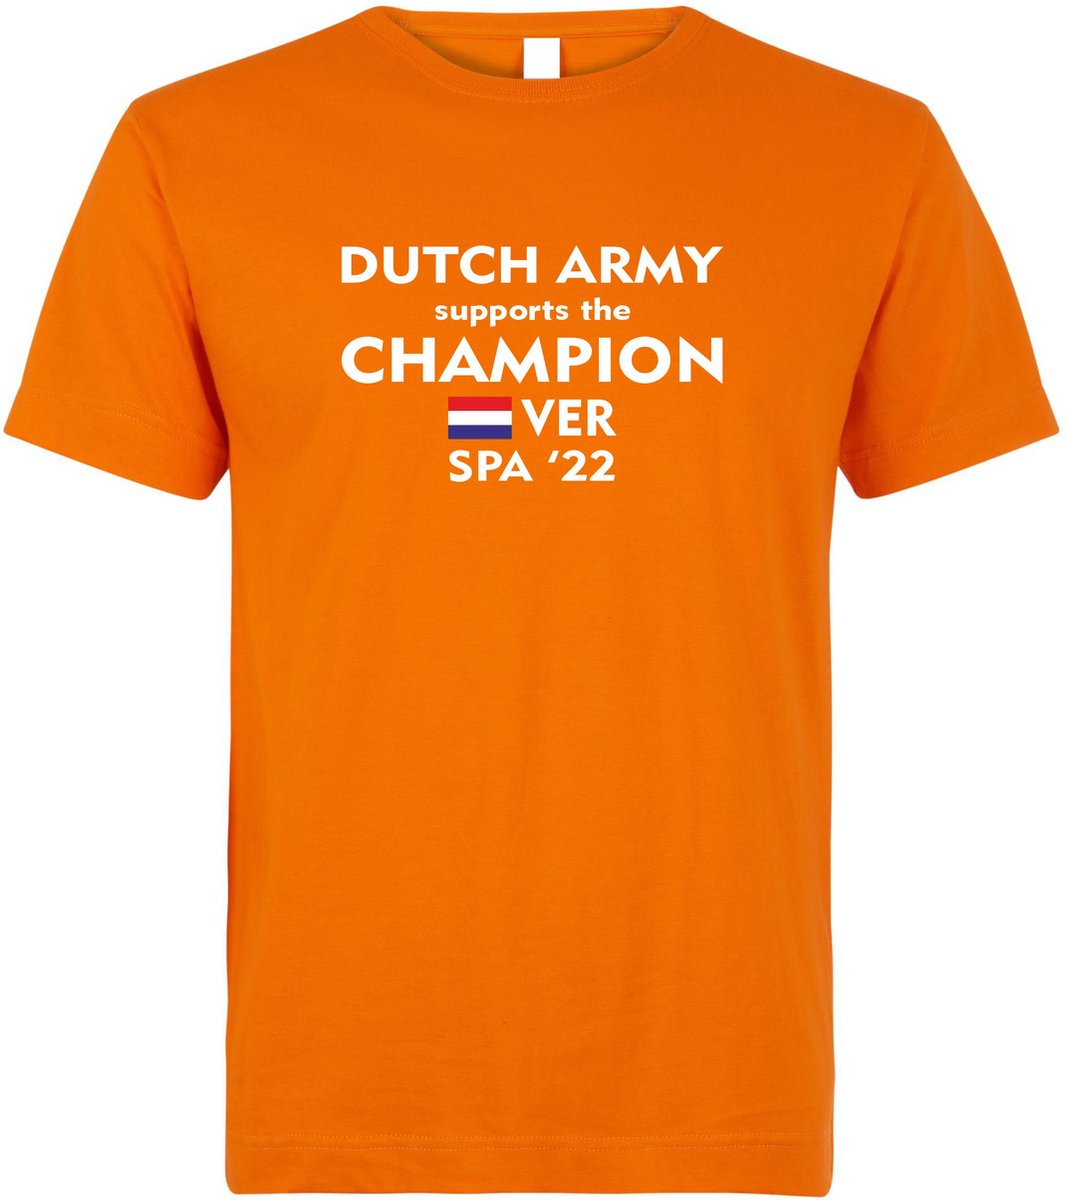 T-shirt kinderen Dutch Army supports the Champion Spa 22 | Max Verstappen / Red Bull Racing / Formule 1 fan | Grand Prix Circuit Spa-Francorchamps | kleding shirt | Oranje | maat 152